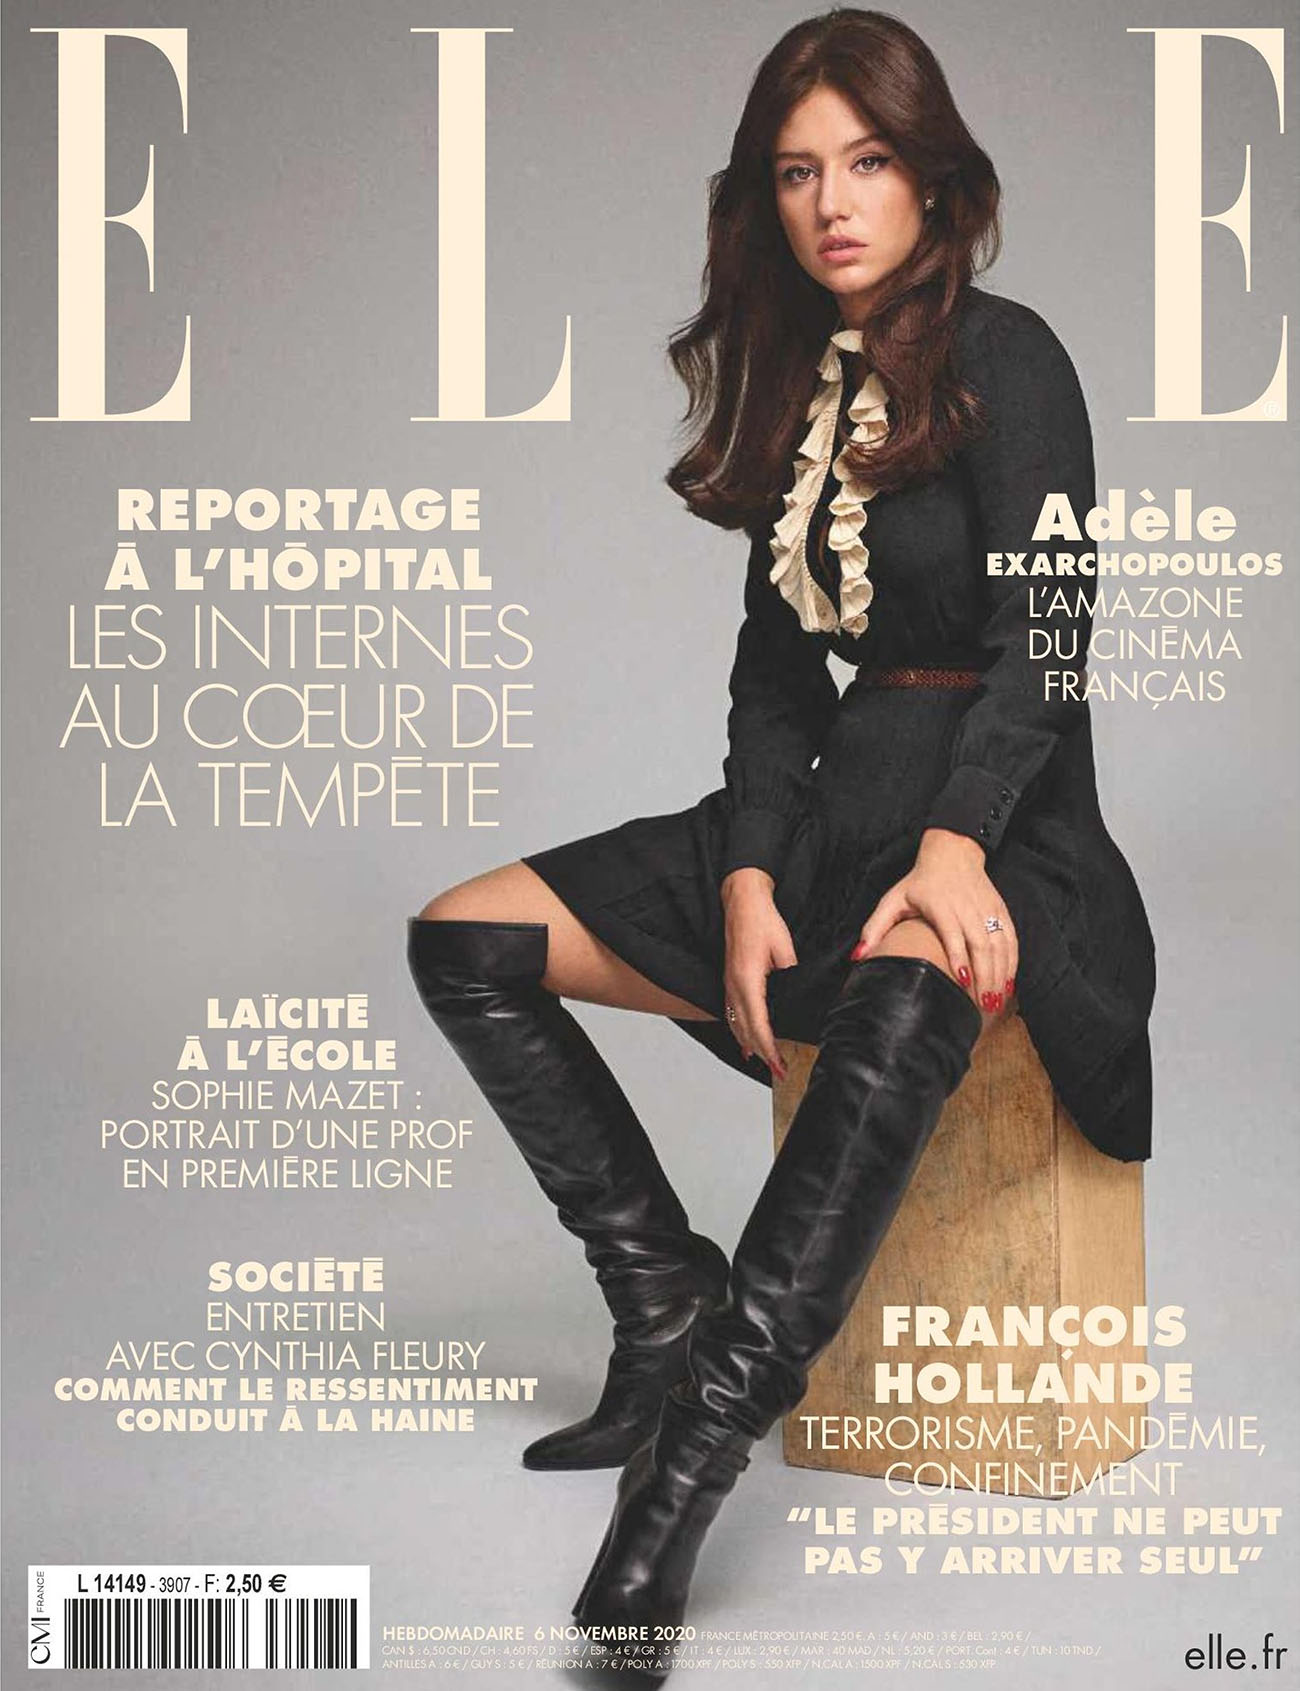 Dedicate Magazine Issue Winter 2022 2023 Adele Exarchopoulos